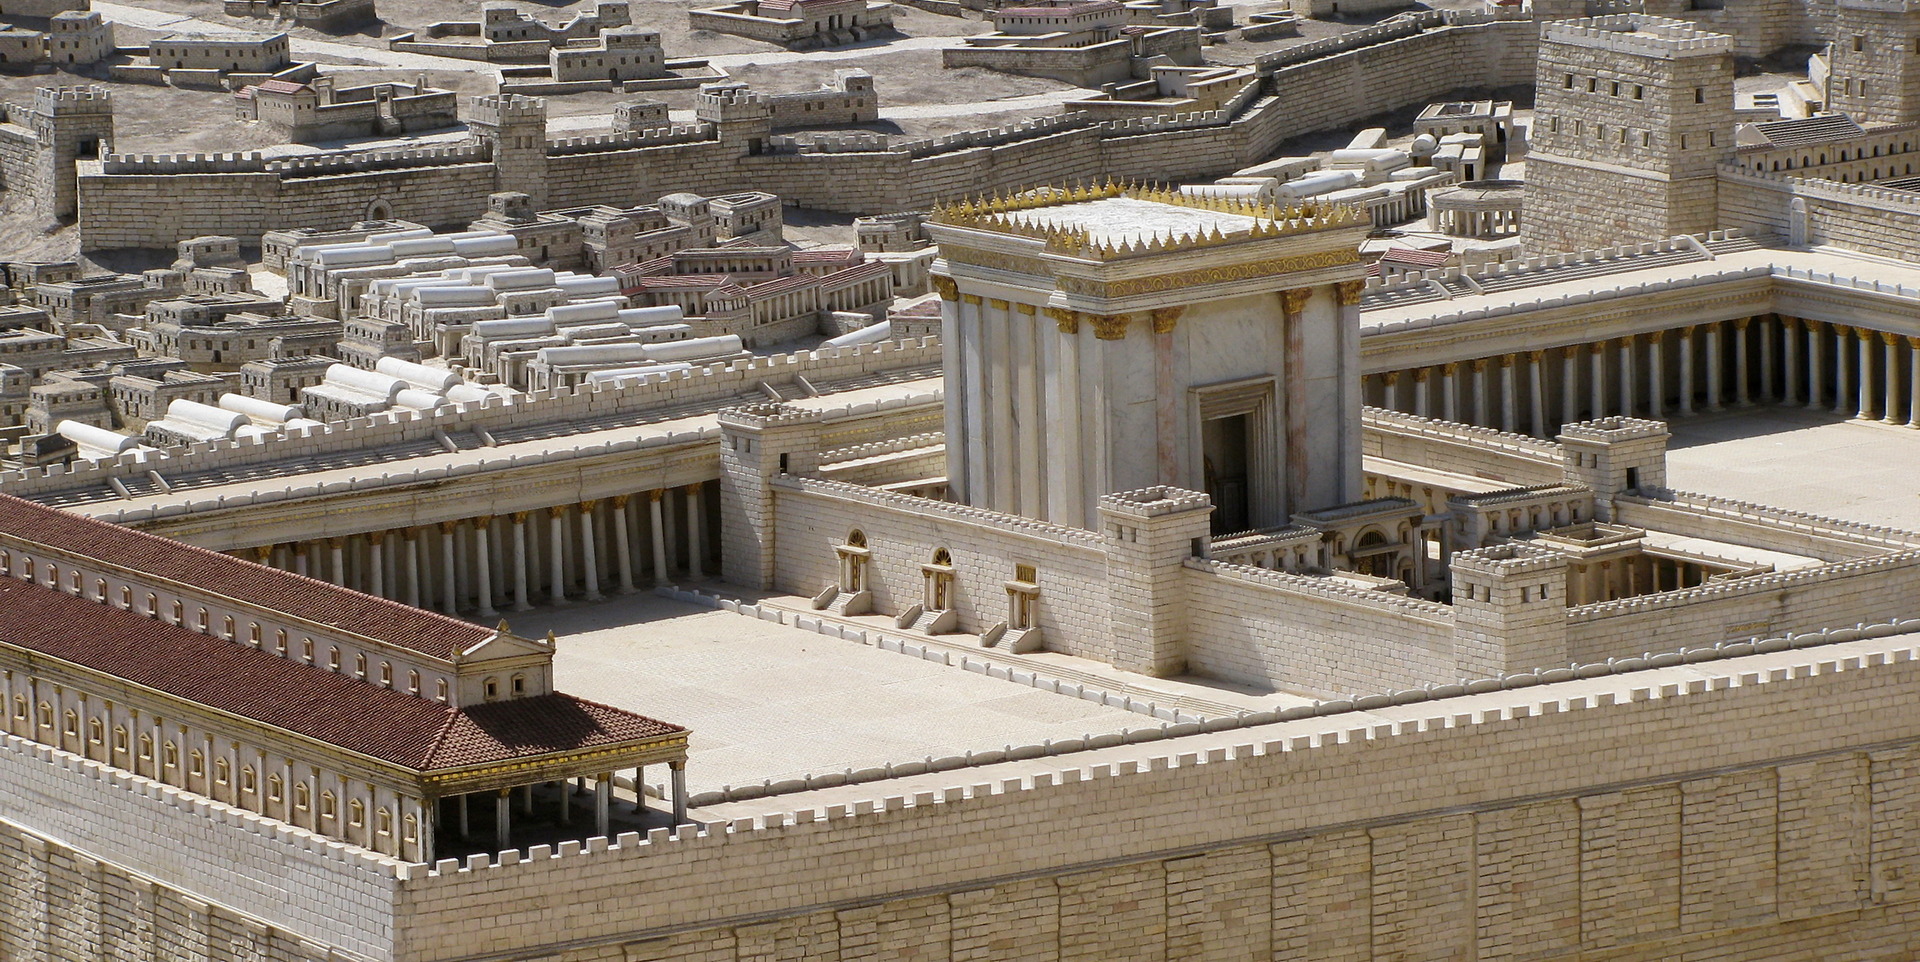 Model of the ancient Second Temple in Jerusalem. Photographer: Flik47. Copyrighted. Licensed (dp: 18217195)